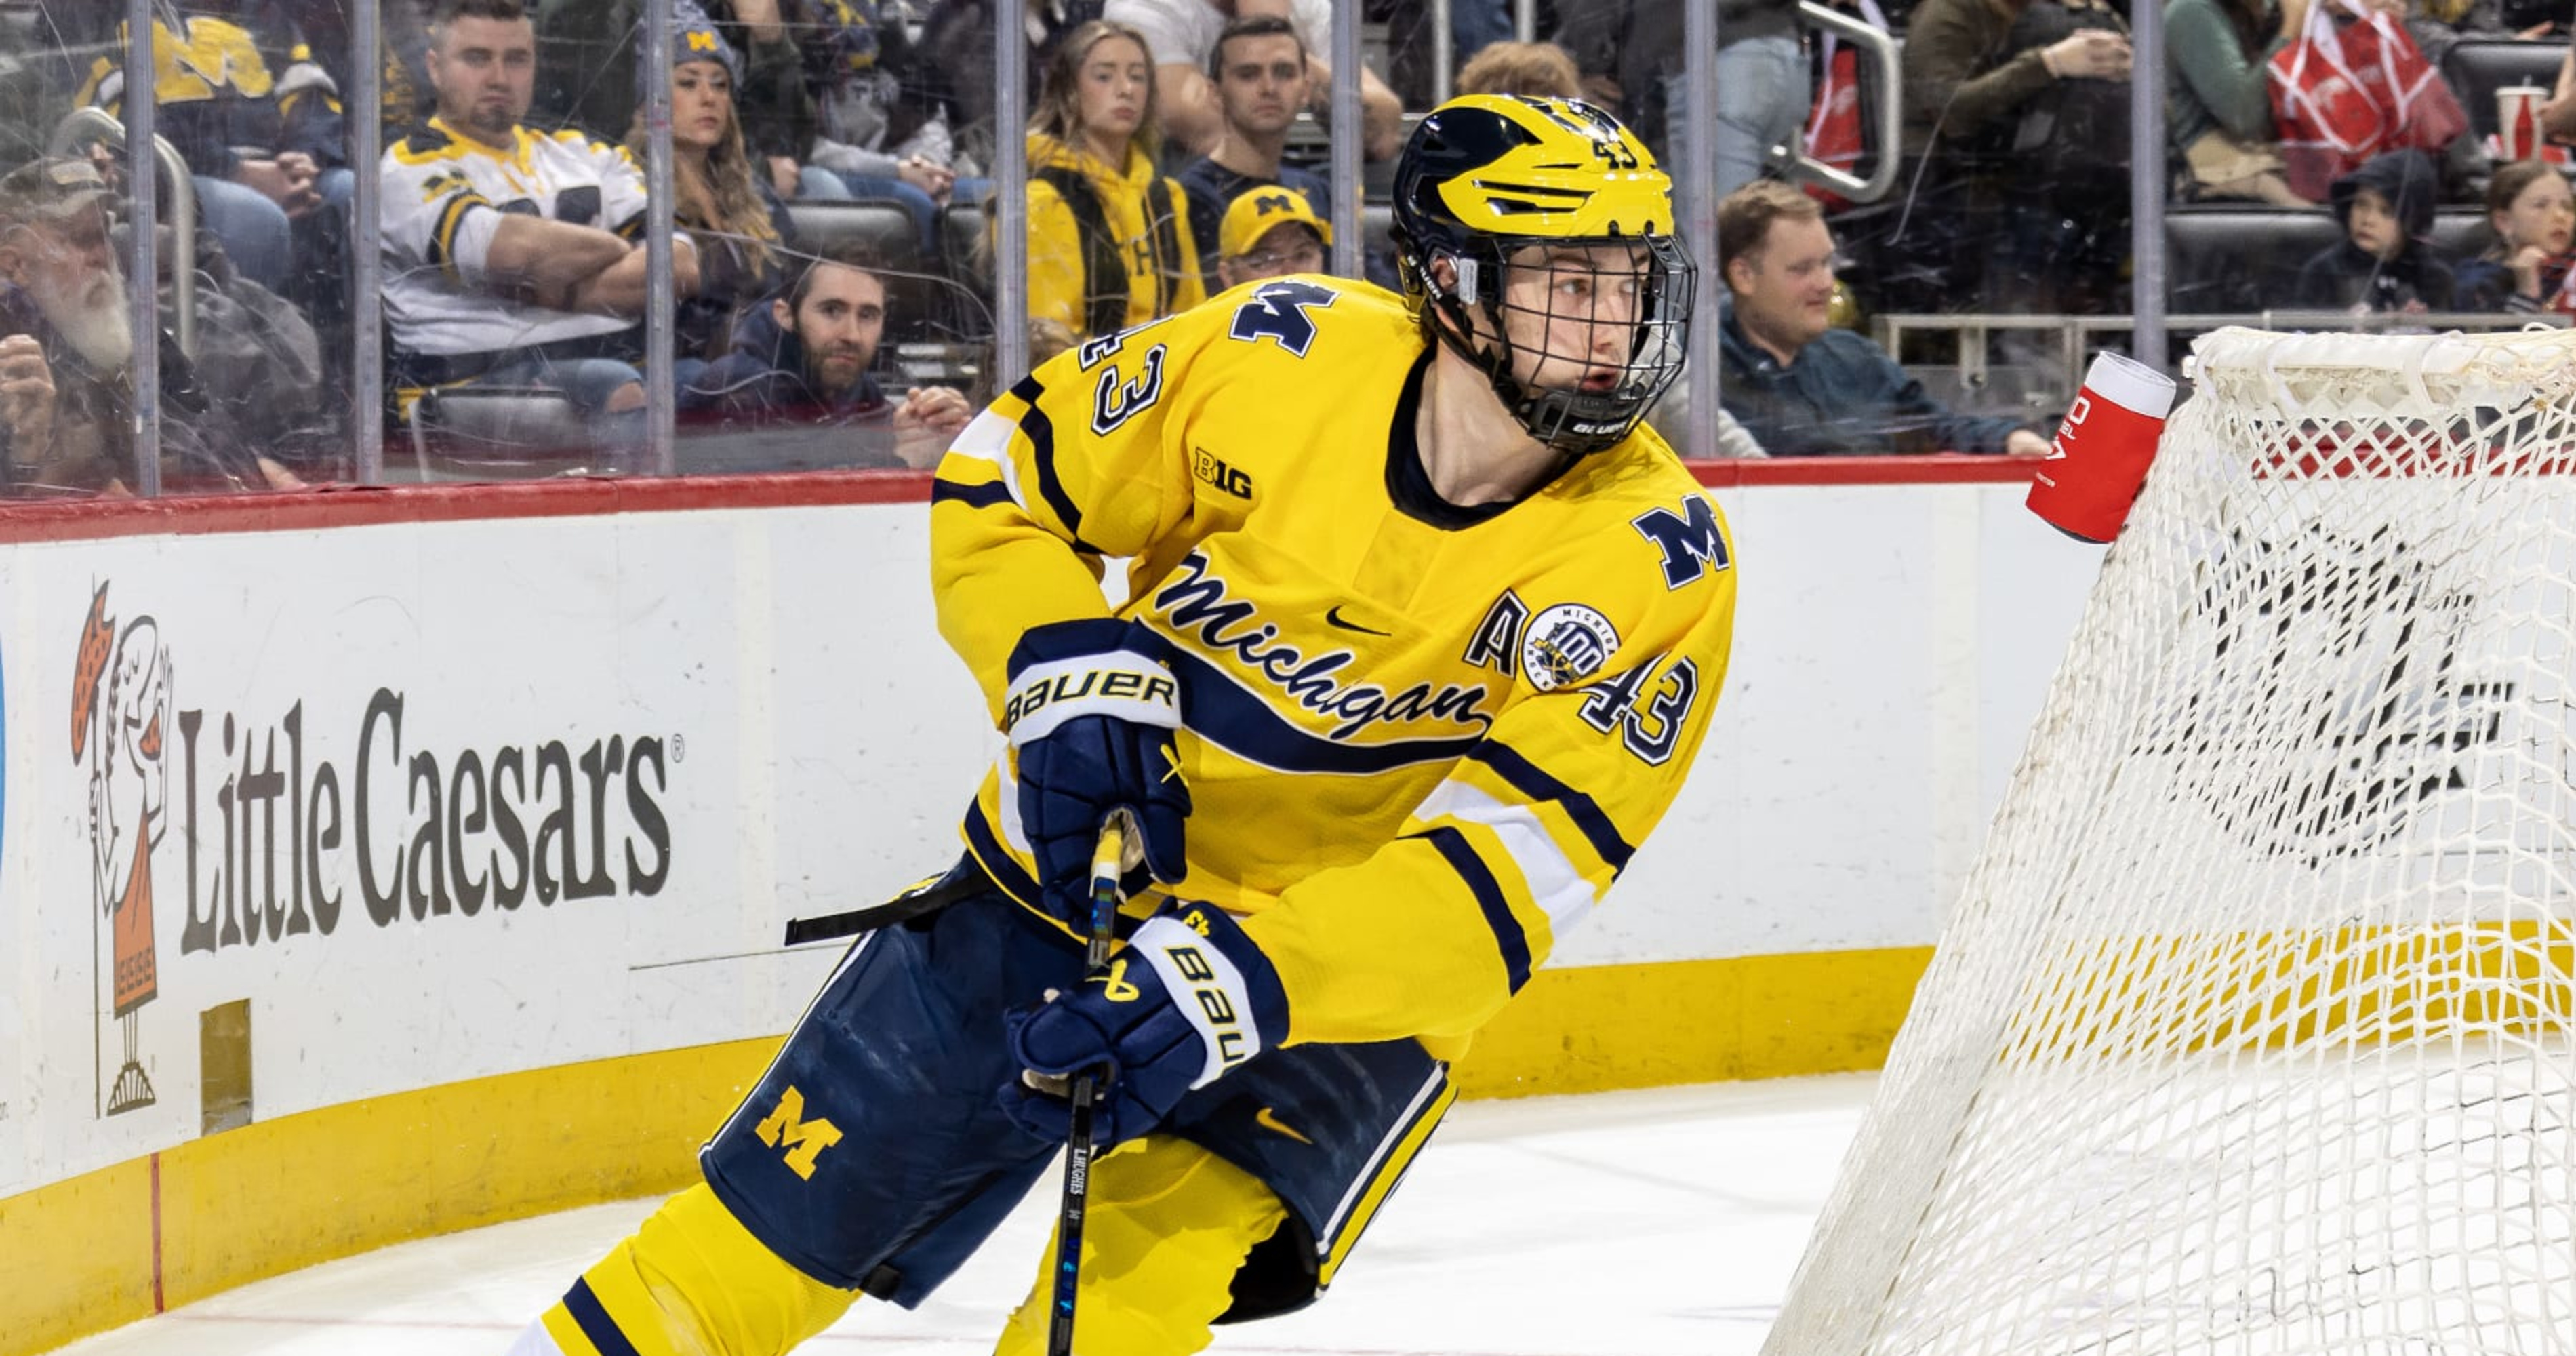 Luke Hughes, Former No. 4 Overall Pick, to Join Devils After Michigan’s